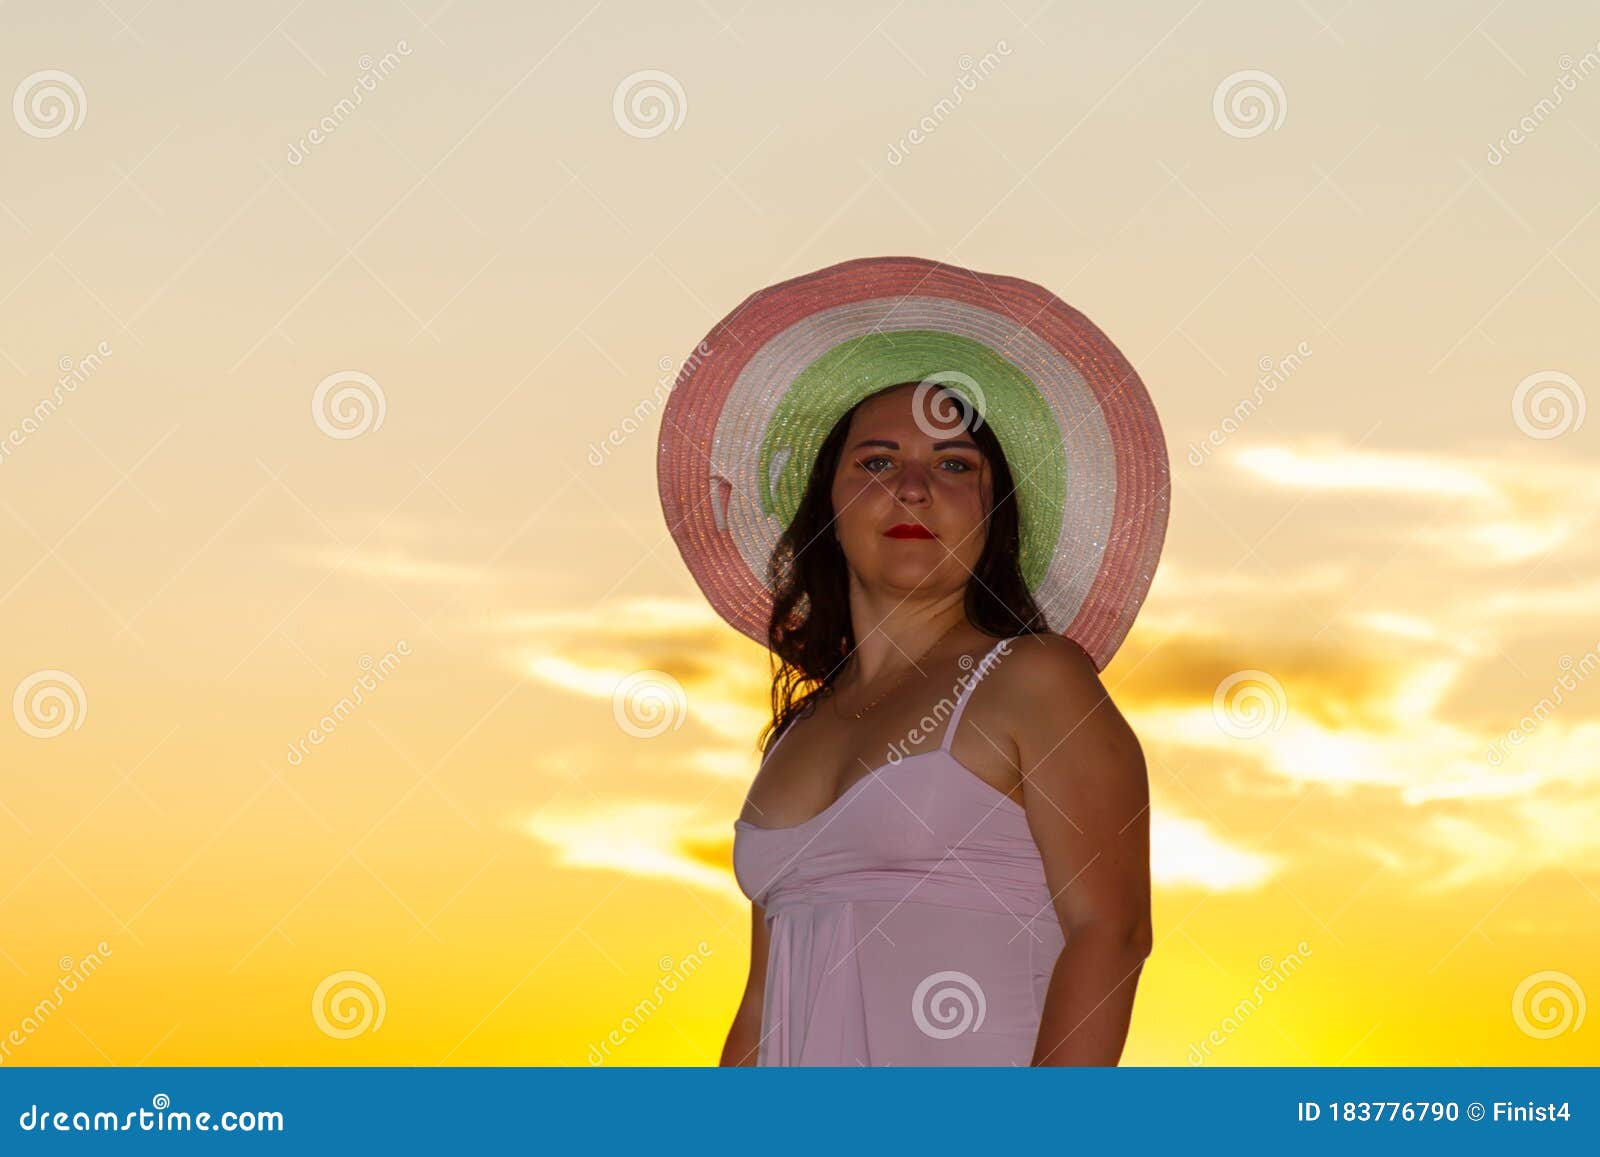 woman in a white dress and hat on a background of a sunset sky